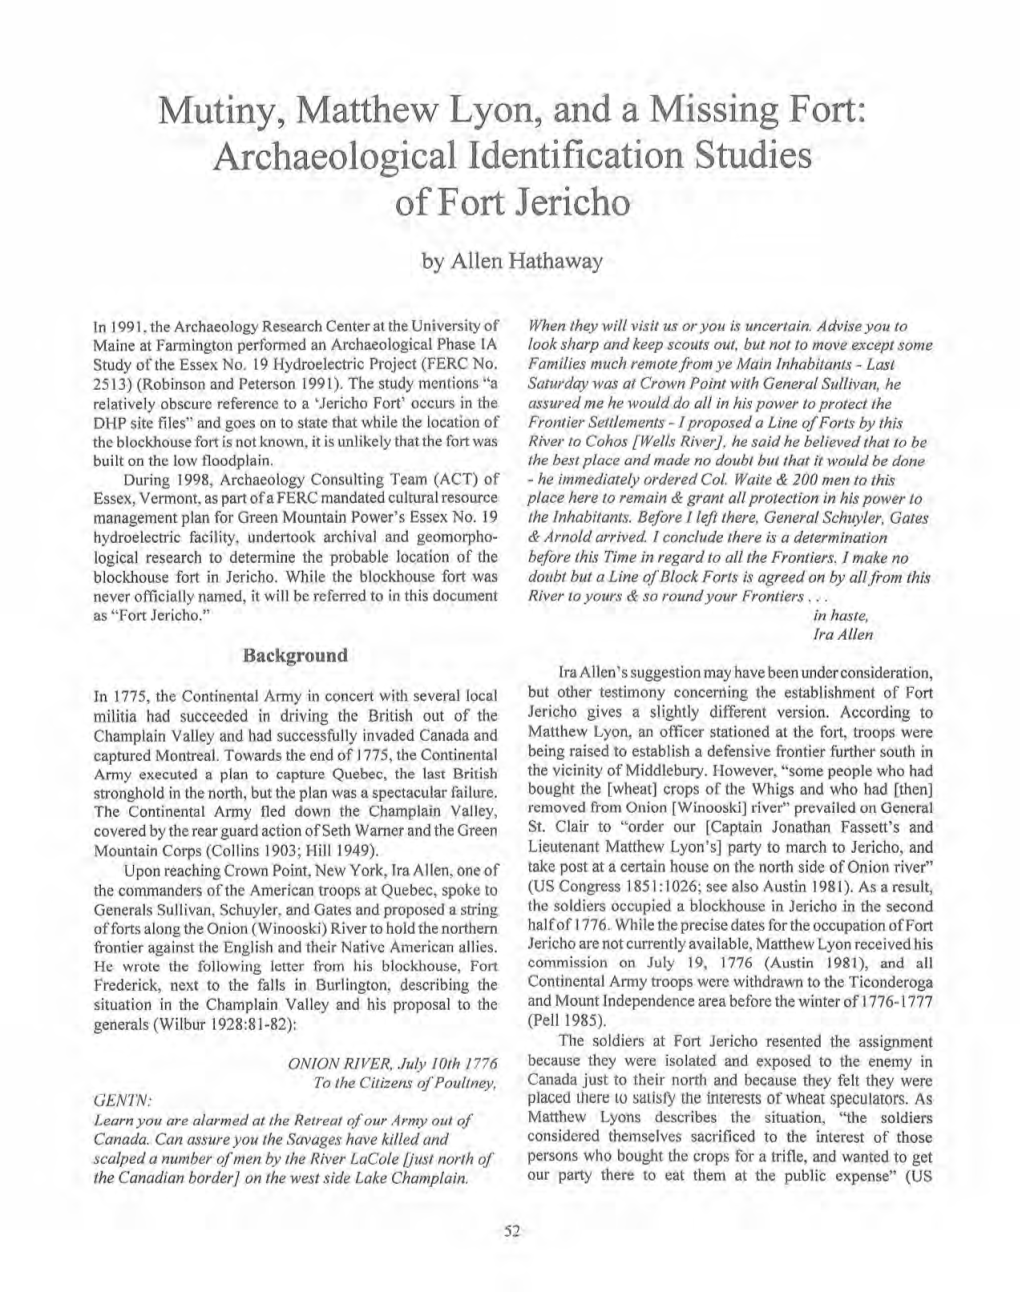 Mutiny, Matthew Lyon, and a Missing Fort: Archaeological Identification Studies of Fort Jericho